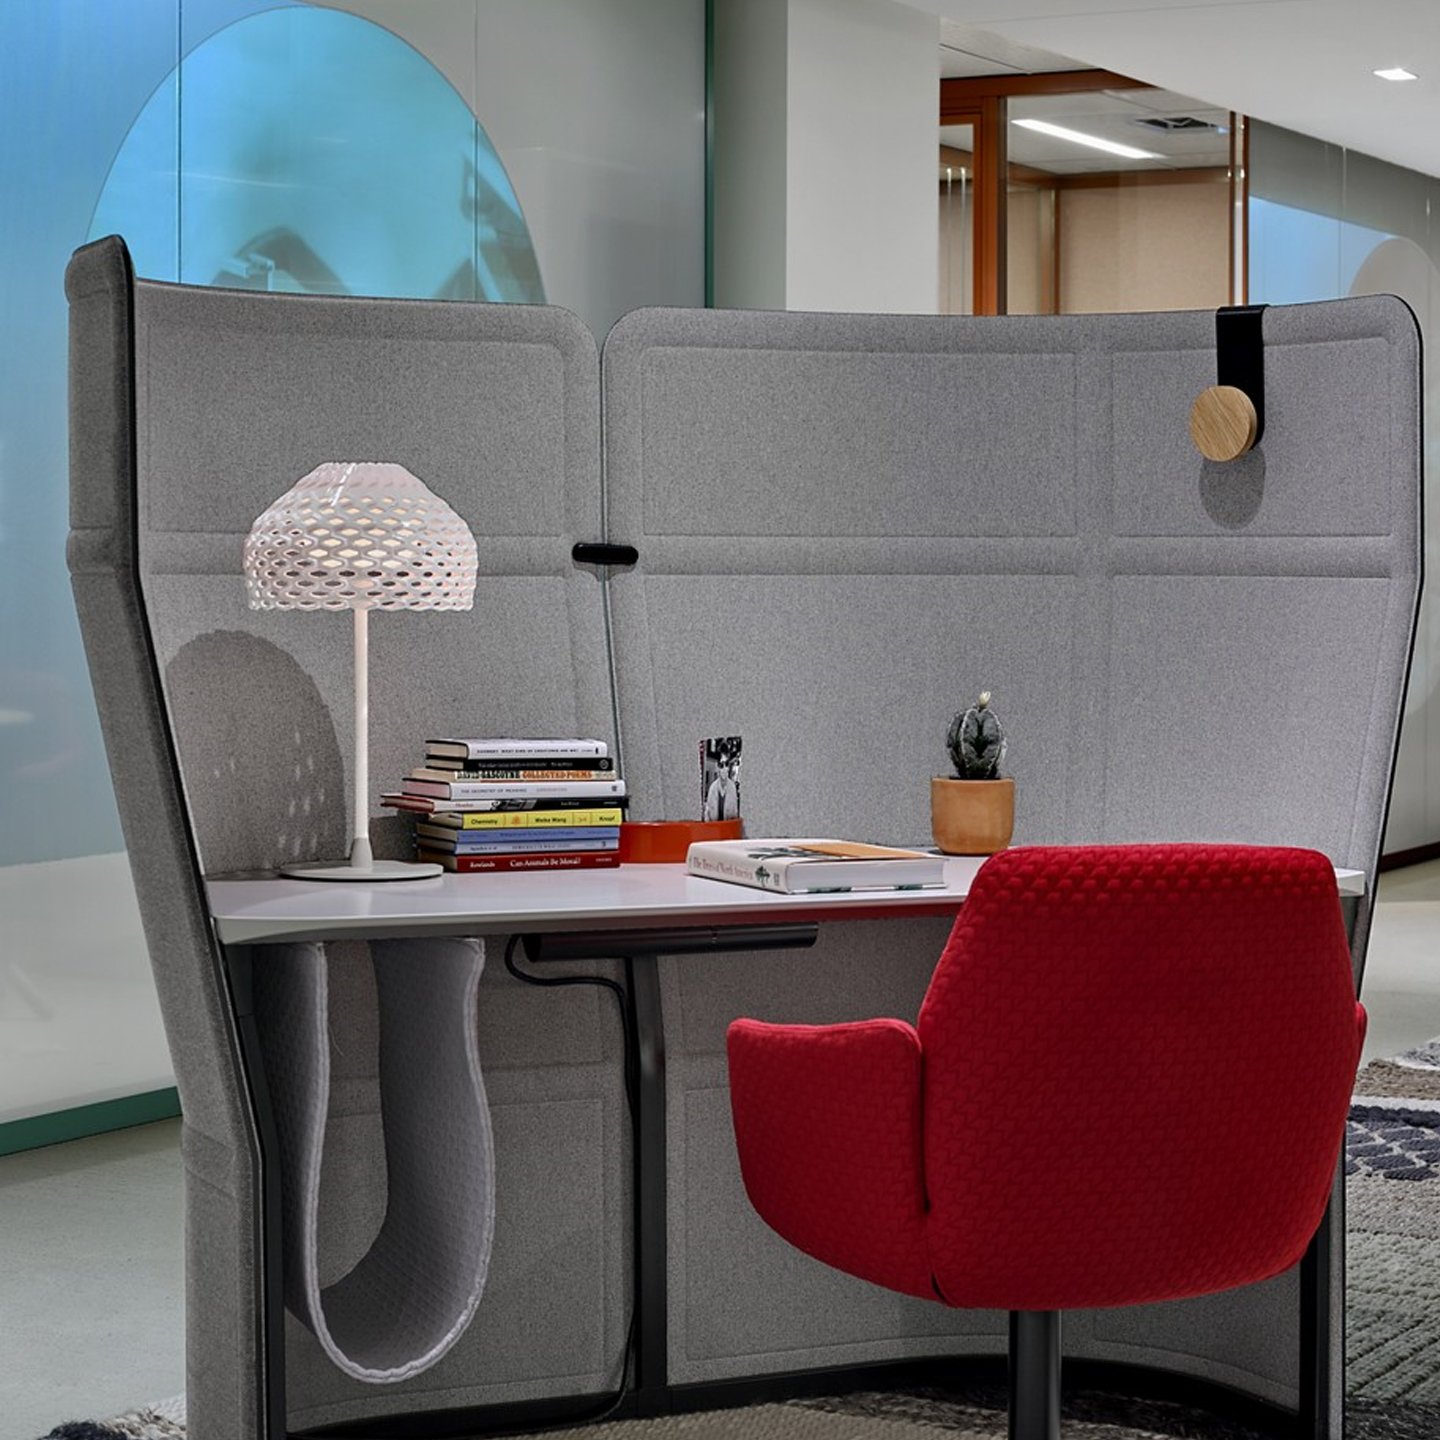 Haworth Openest Single Desk Booth in grey color with red chair at white desk and books on desk in open office lounge space